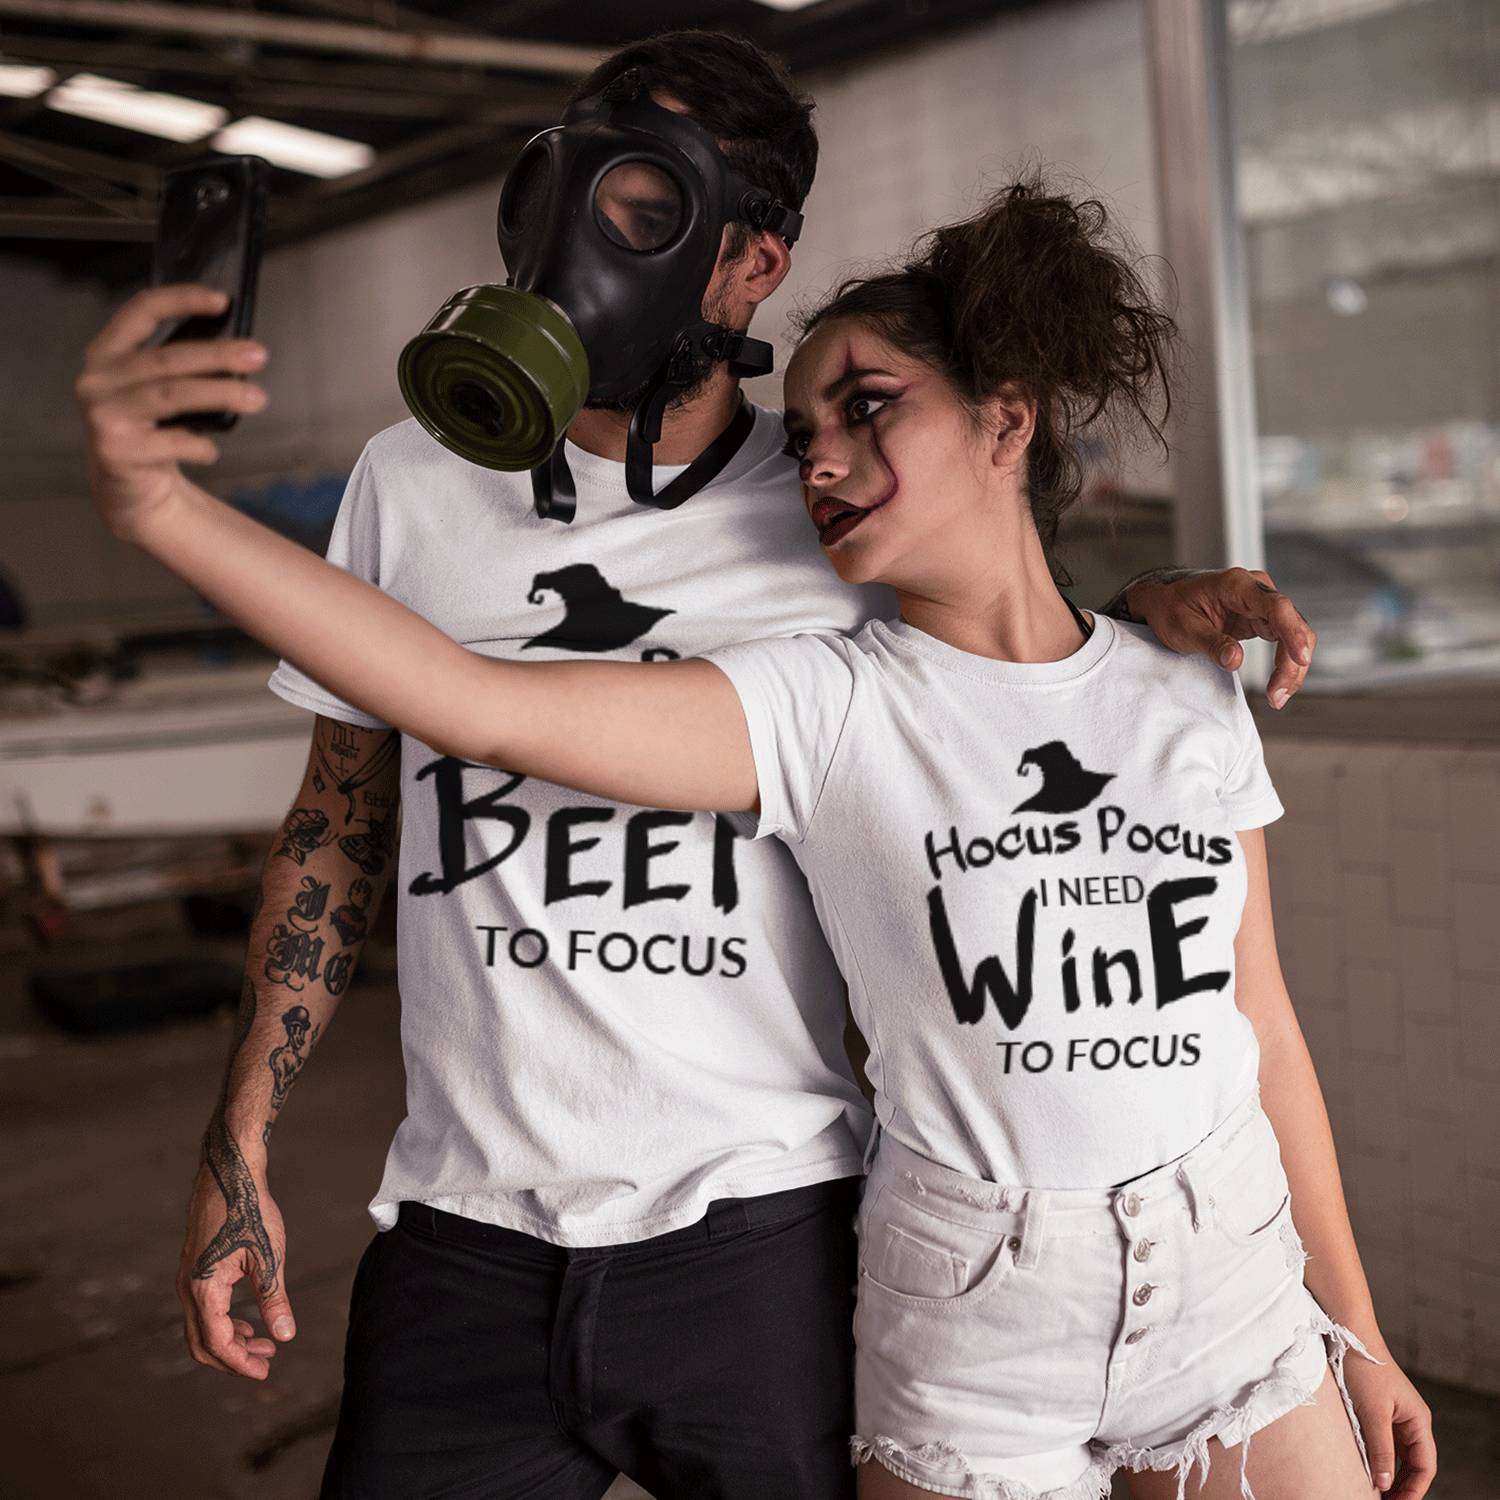 Funny matching i like her bobbers matching shirts for couples - TenStickers